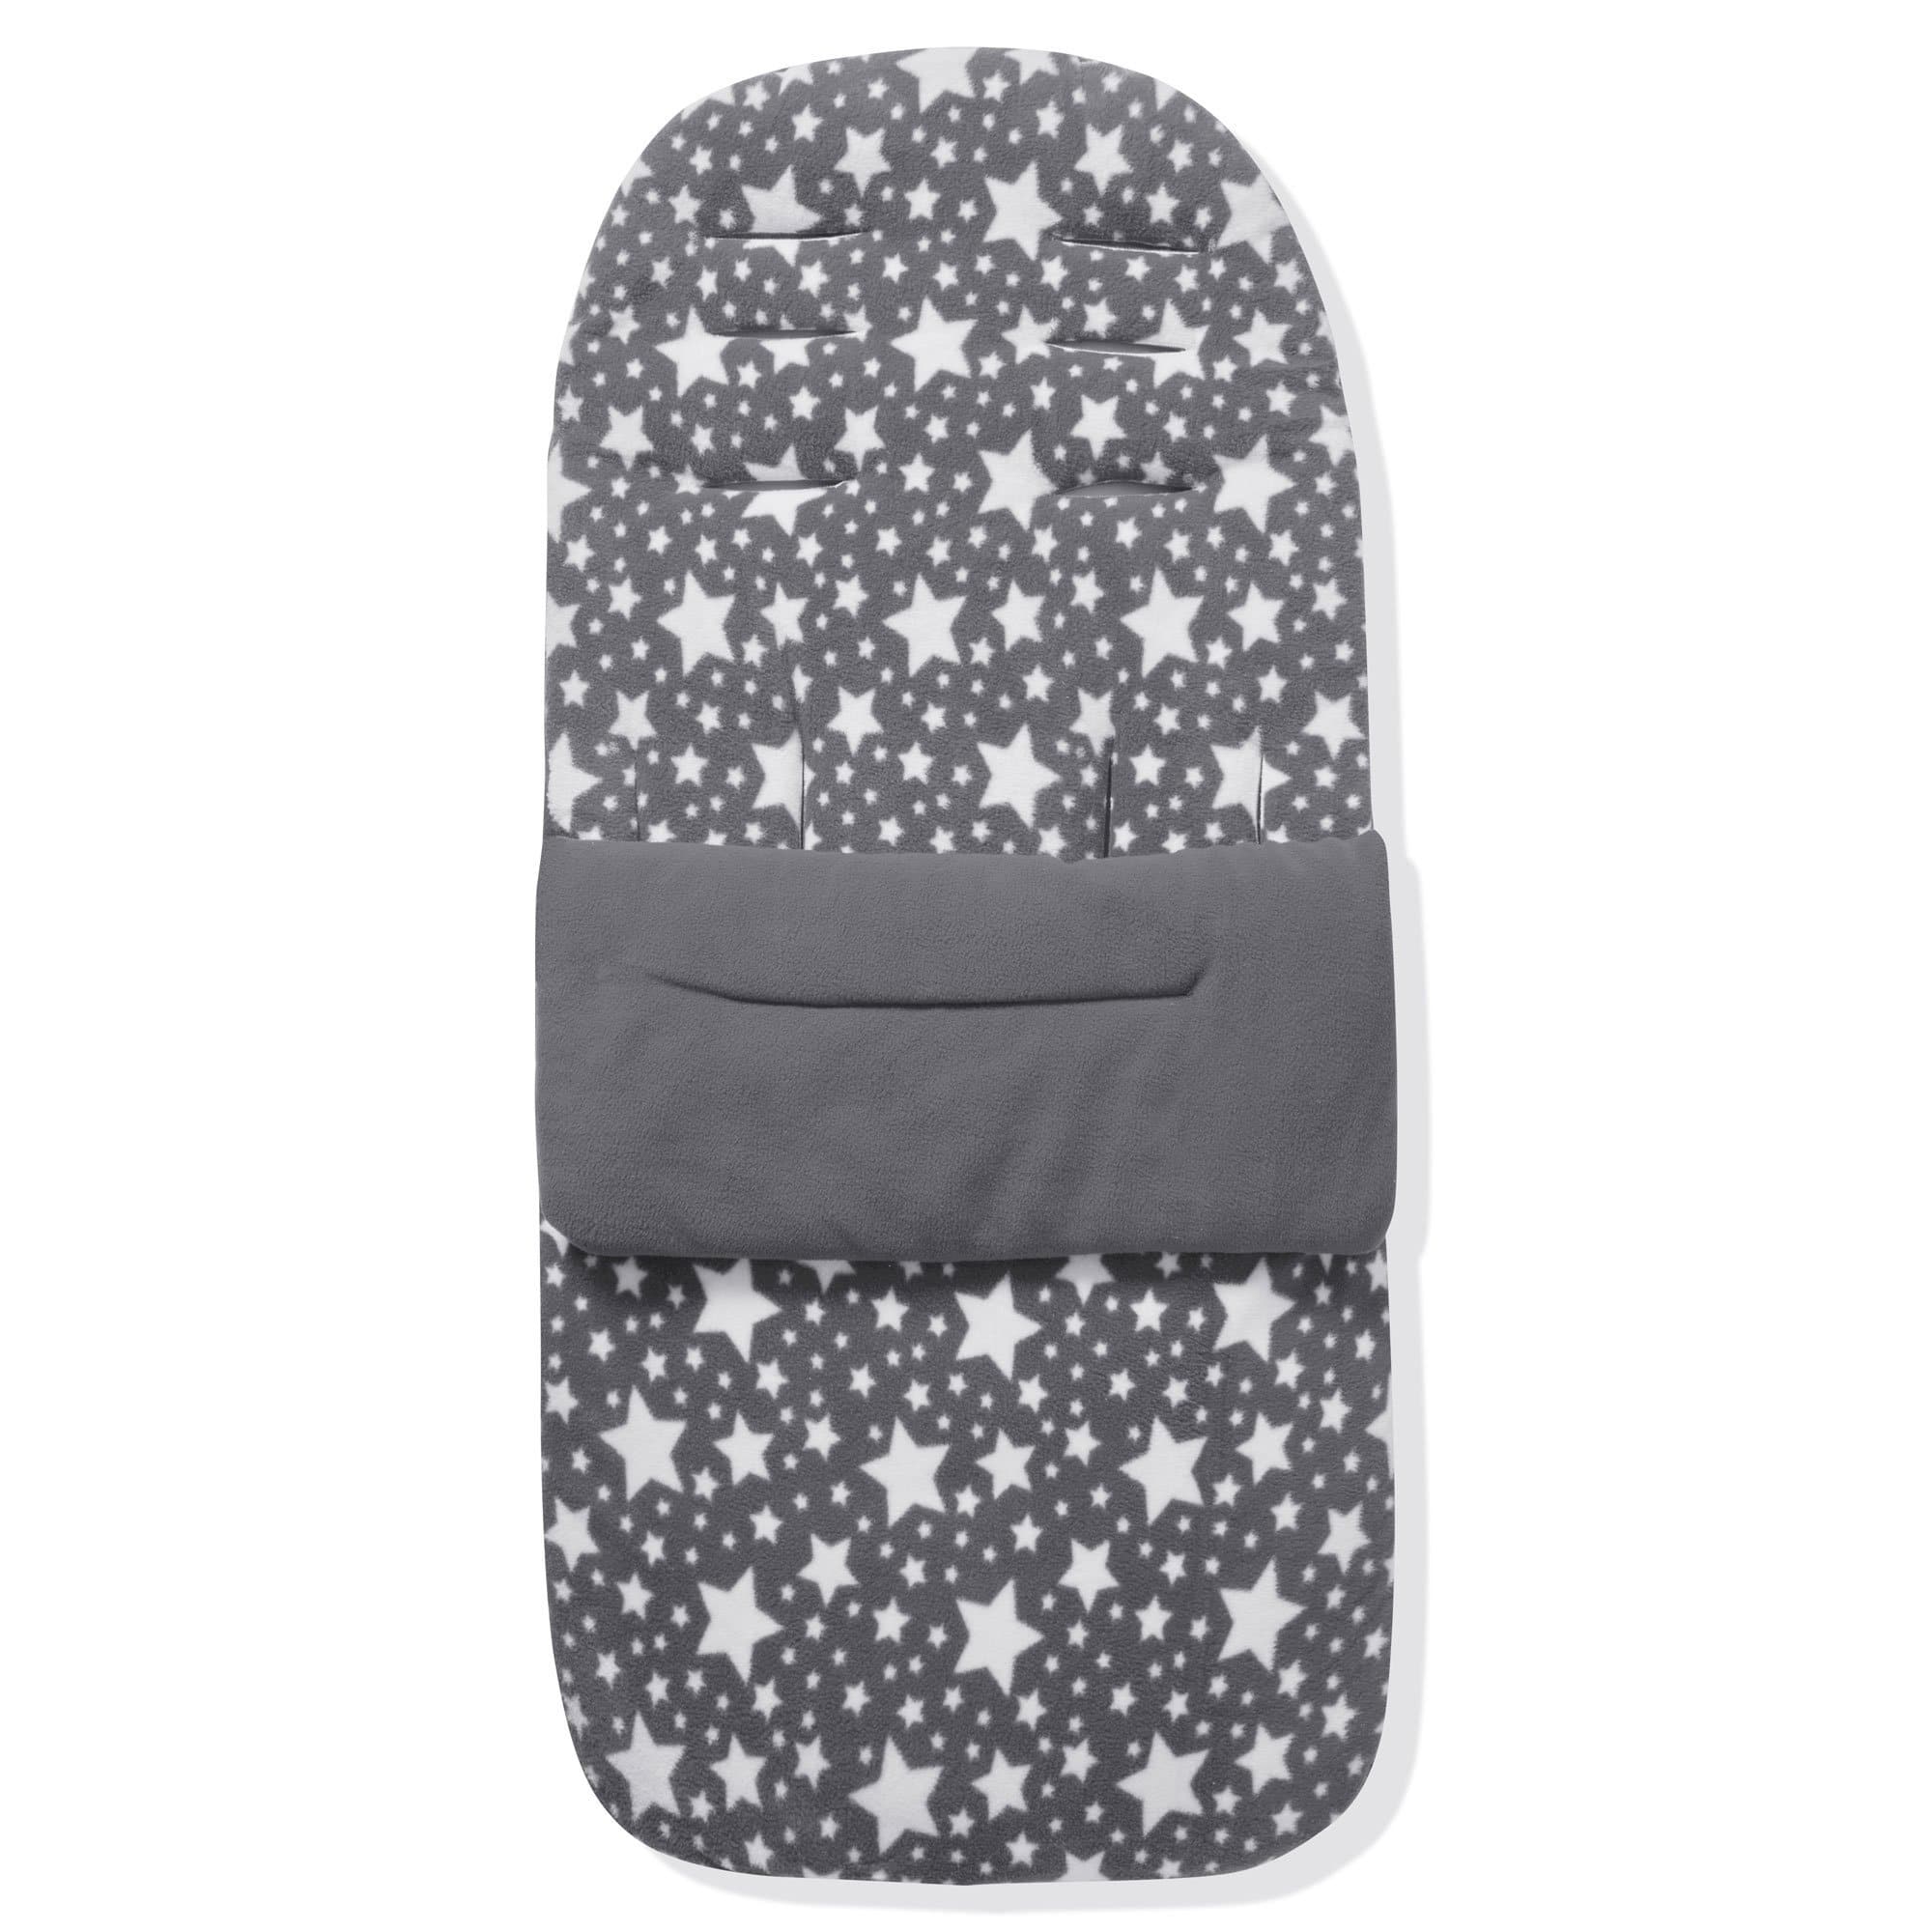 Fleece Footmuff / Cosy Toes Compatible with Peg Perego - Grey Star / Fits All Models | For Your Little One